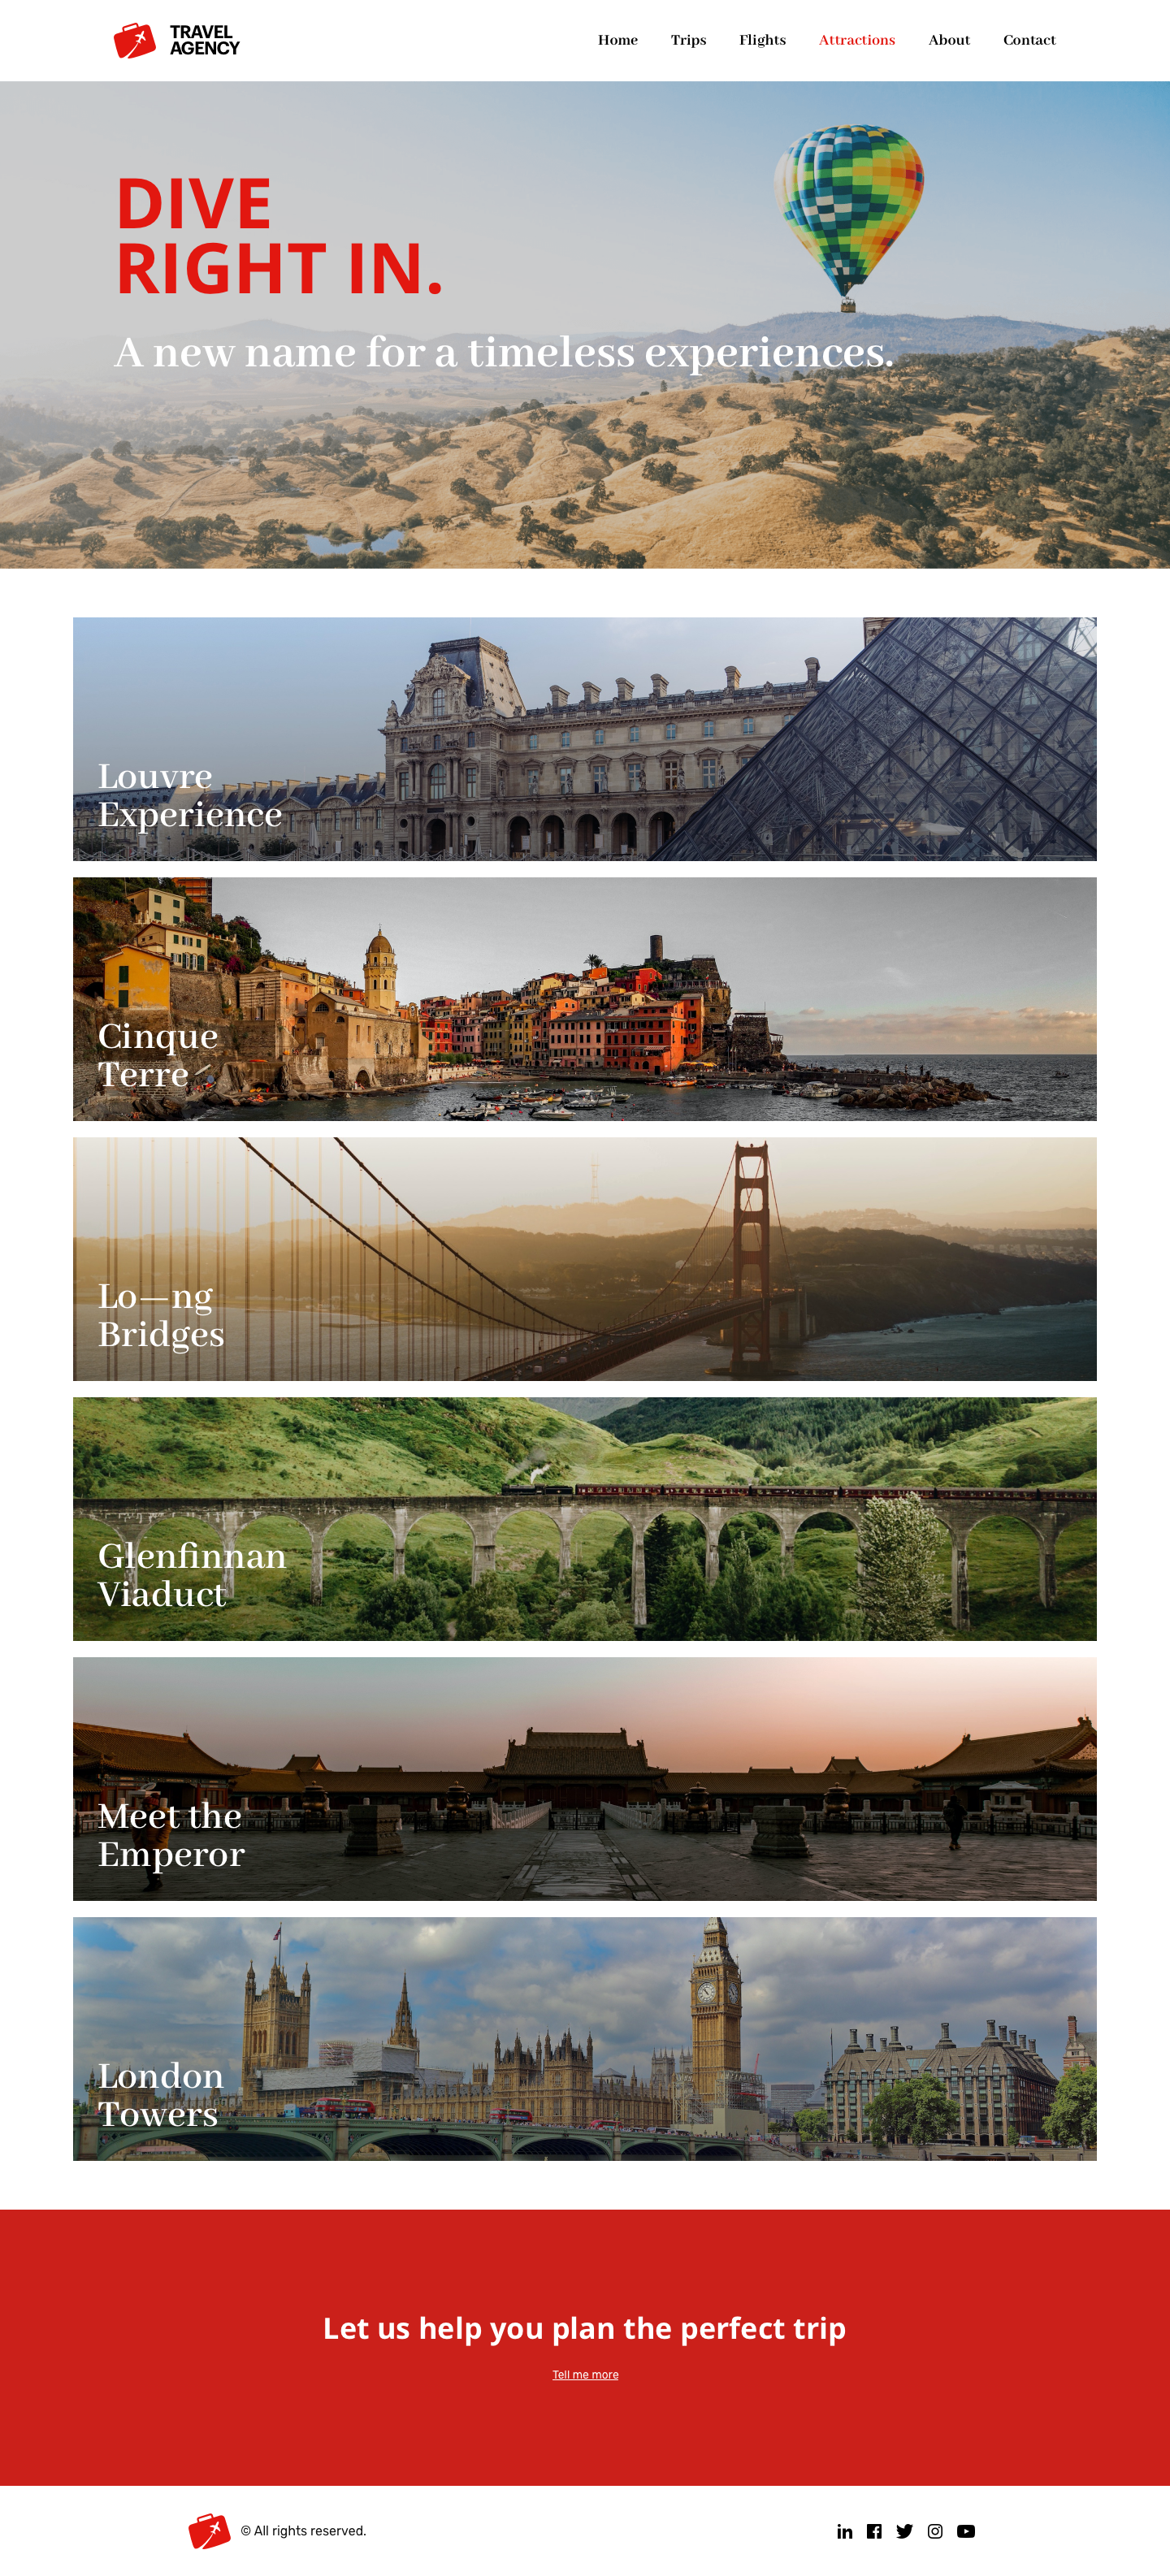 TravelAgency-WebFrontend-Sketch-Attractions_png